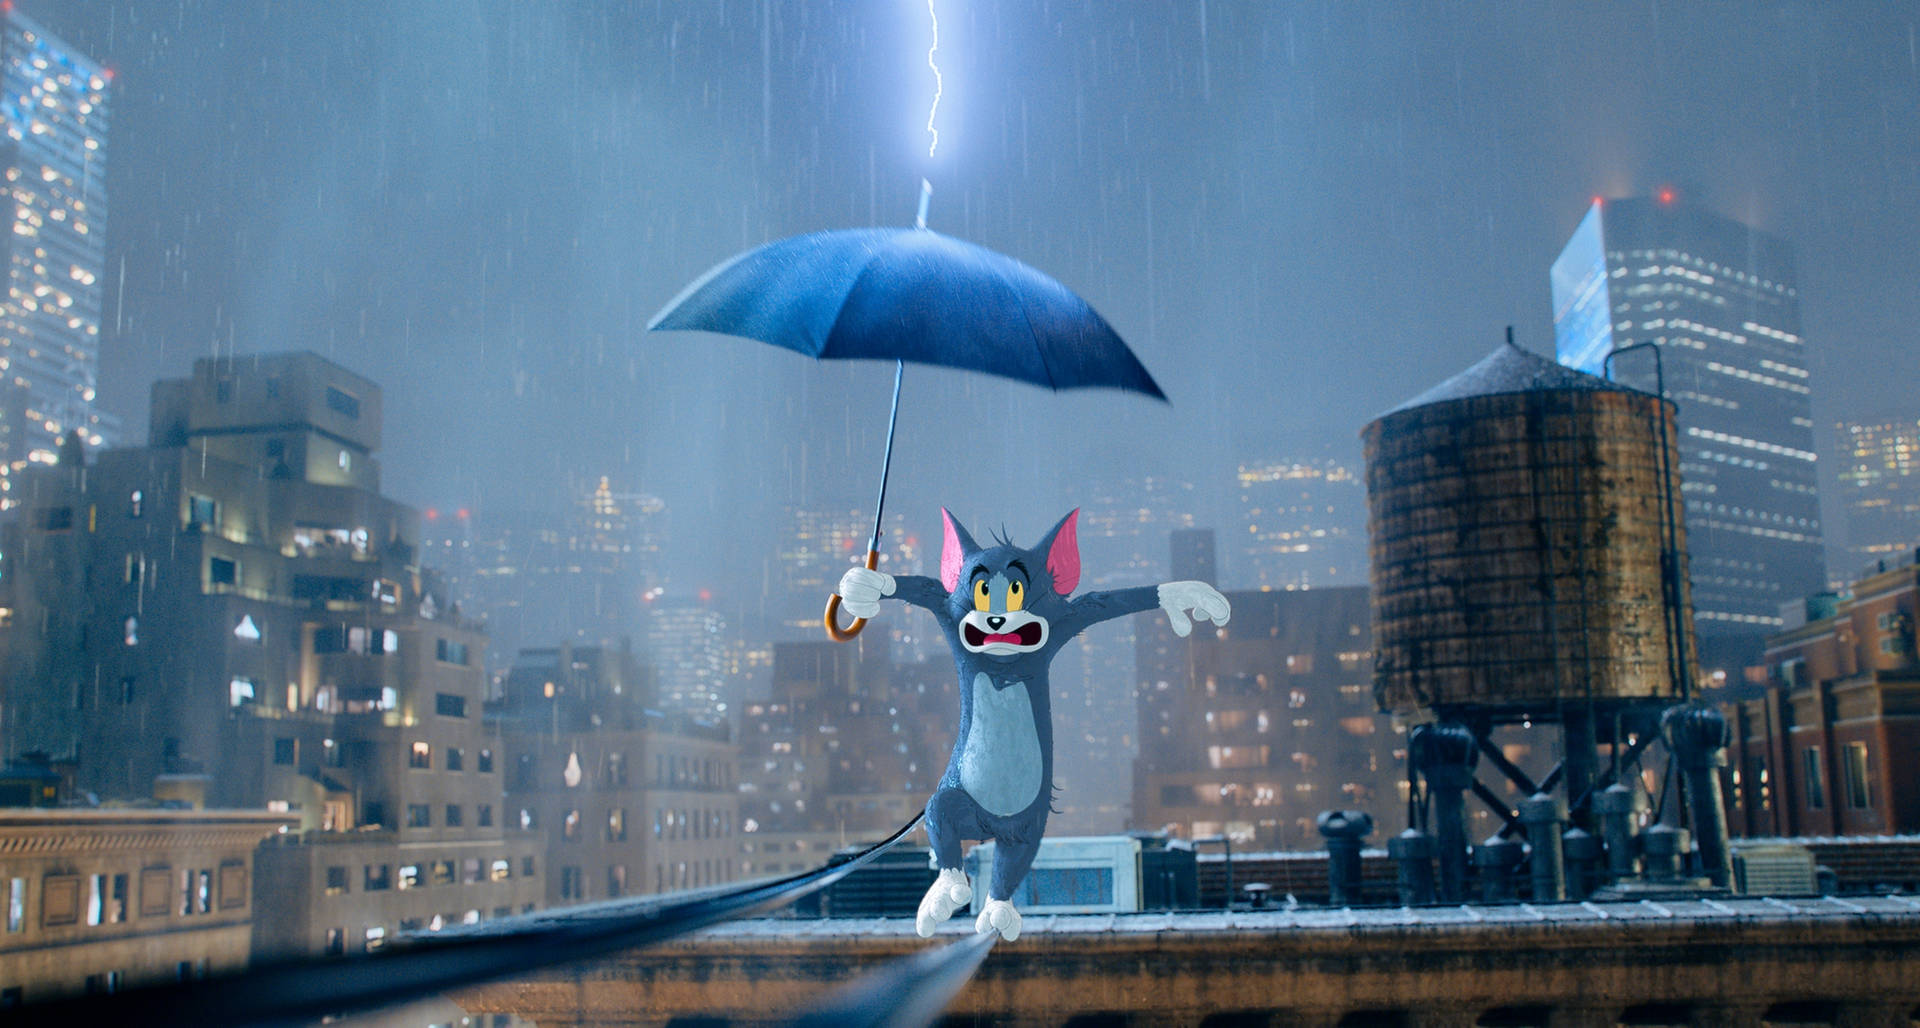 Cute Tom And Jerry With Umbrella Background